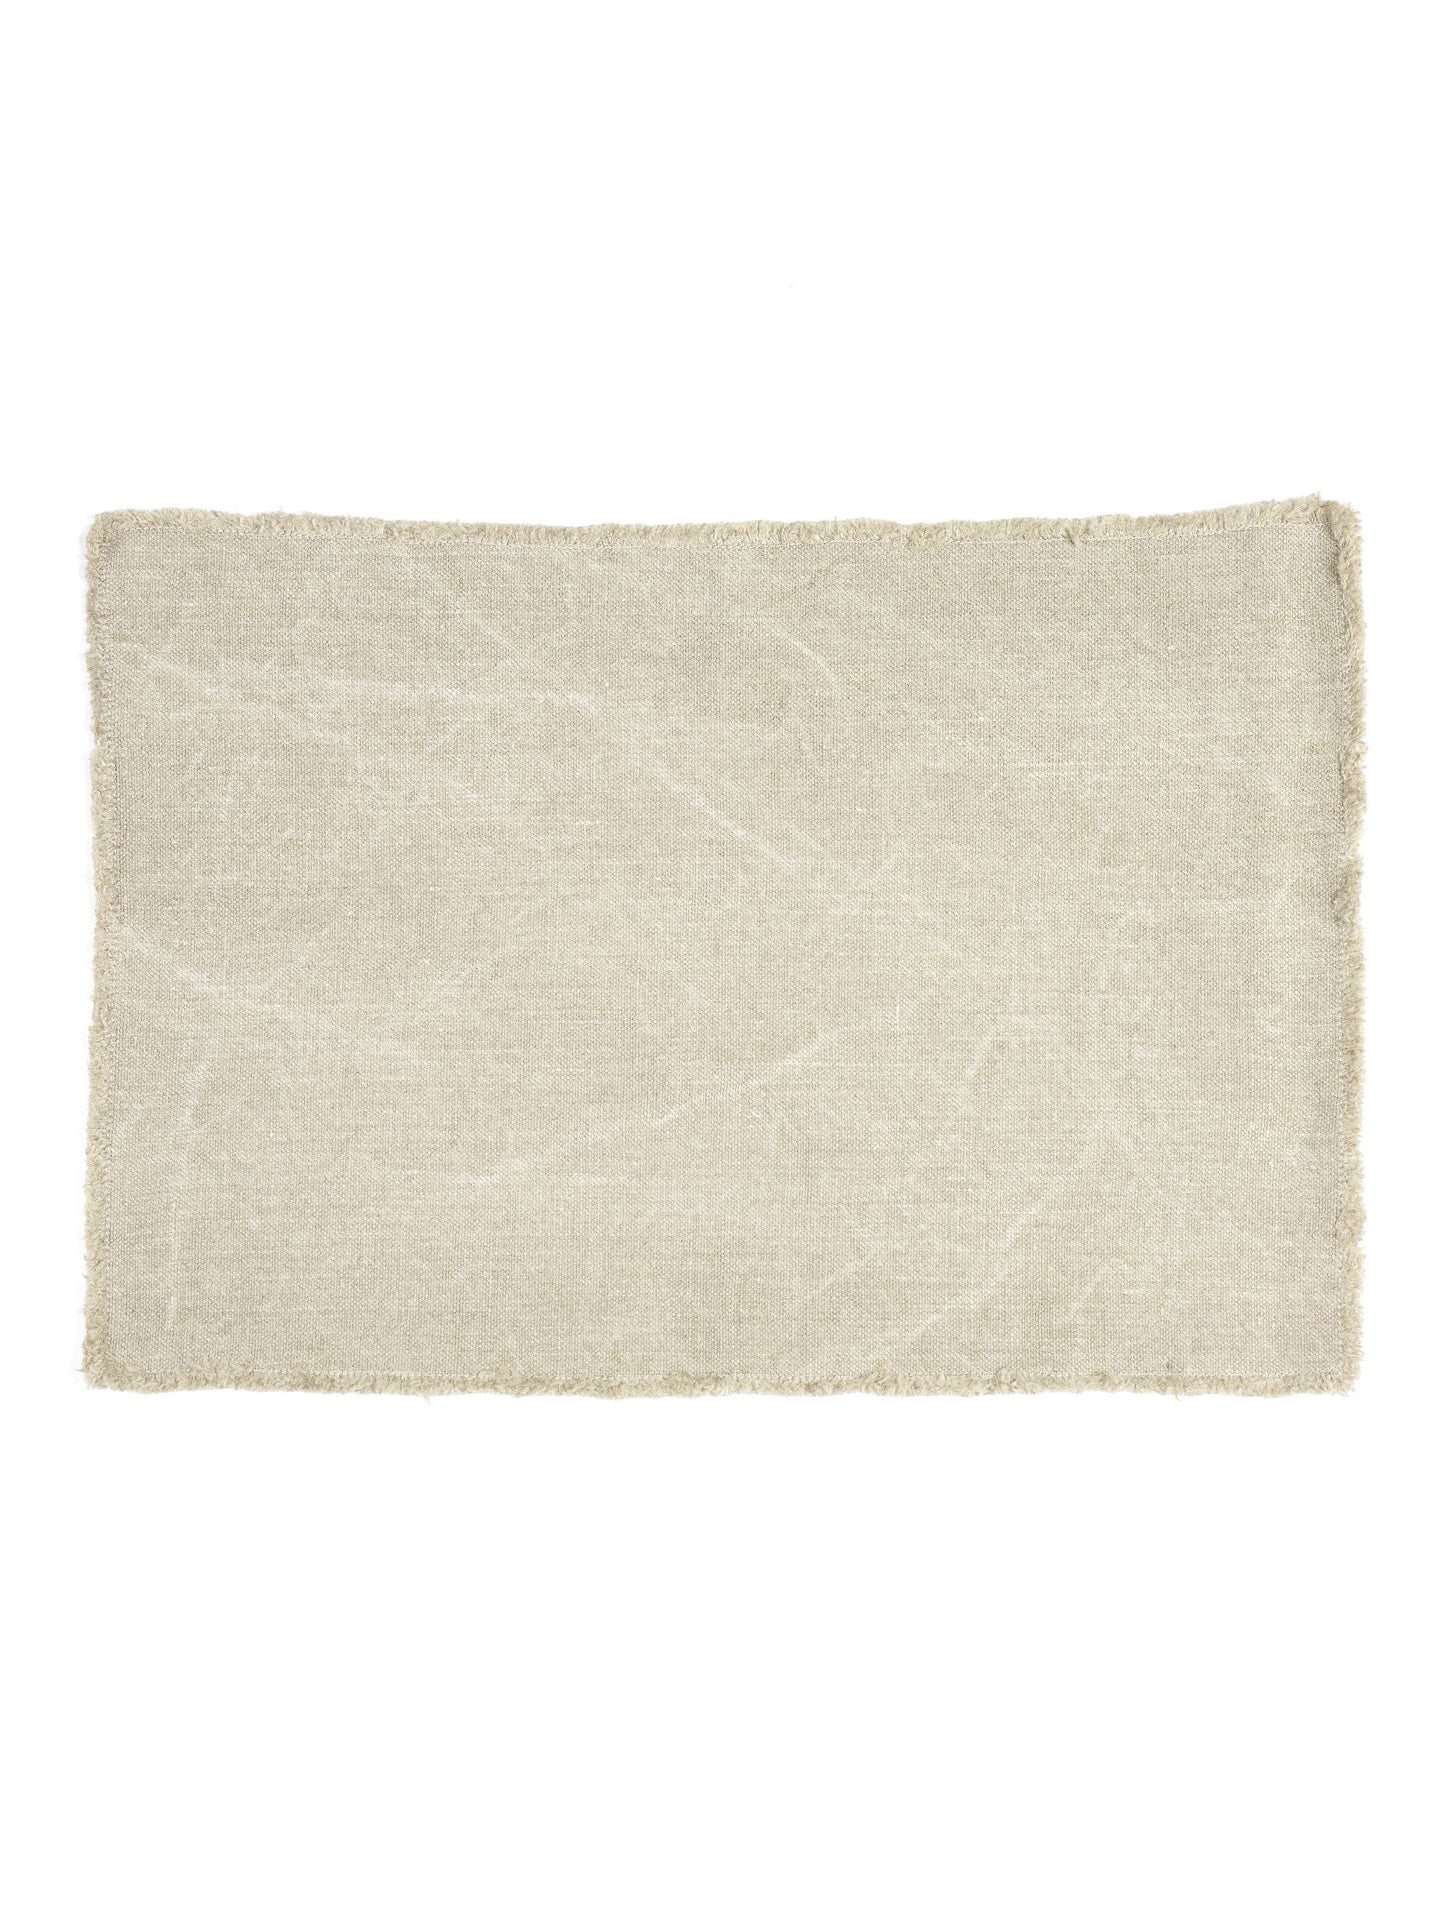 Libeco Pacific Linen Placemats